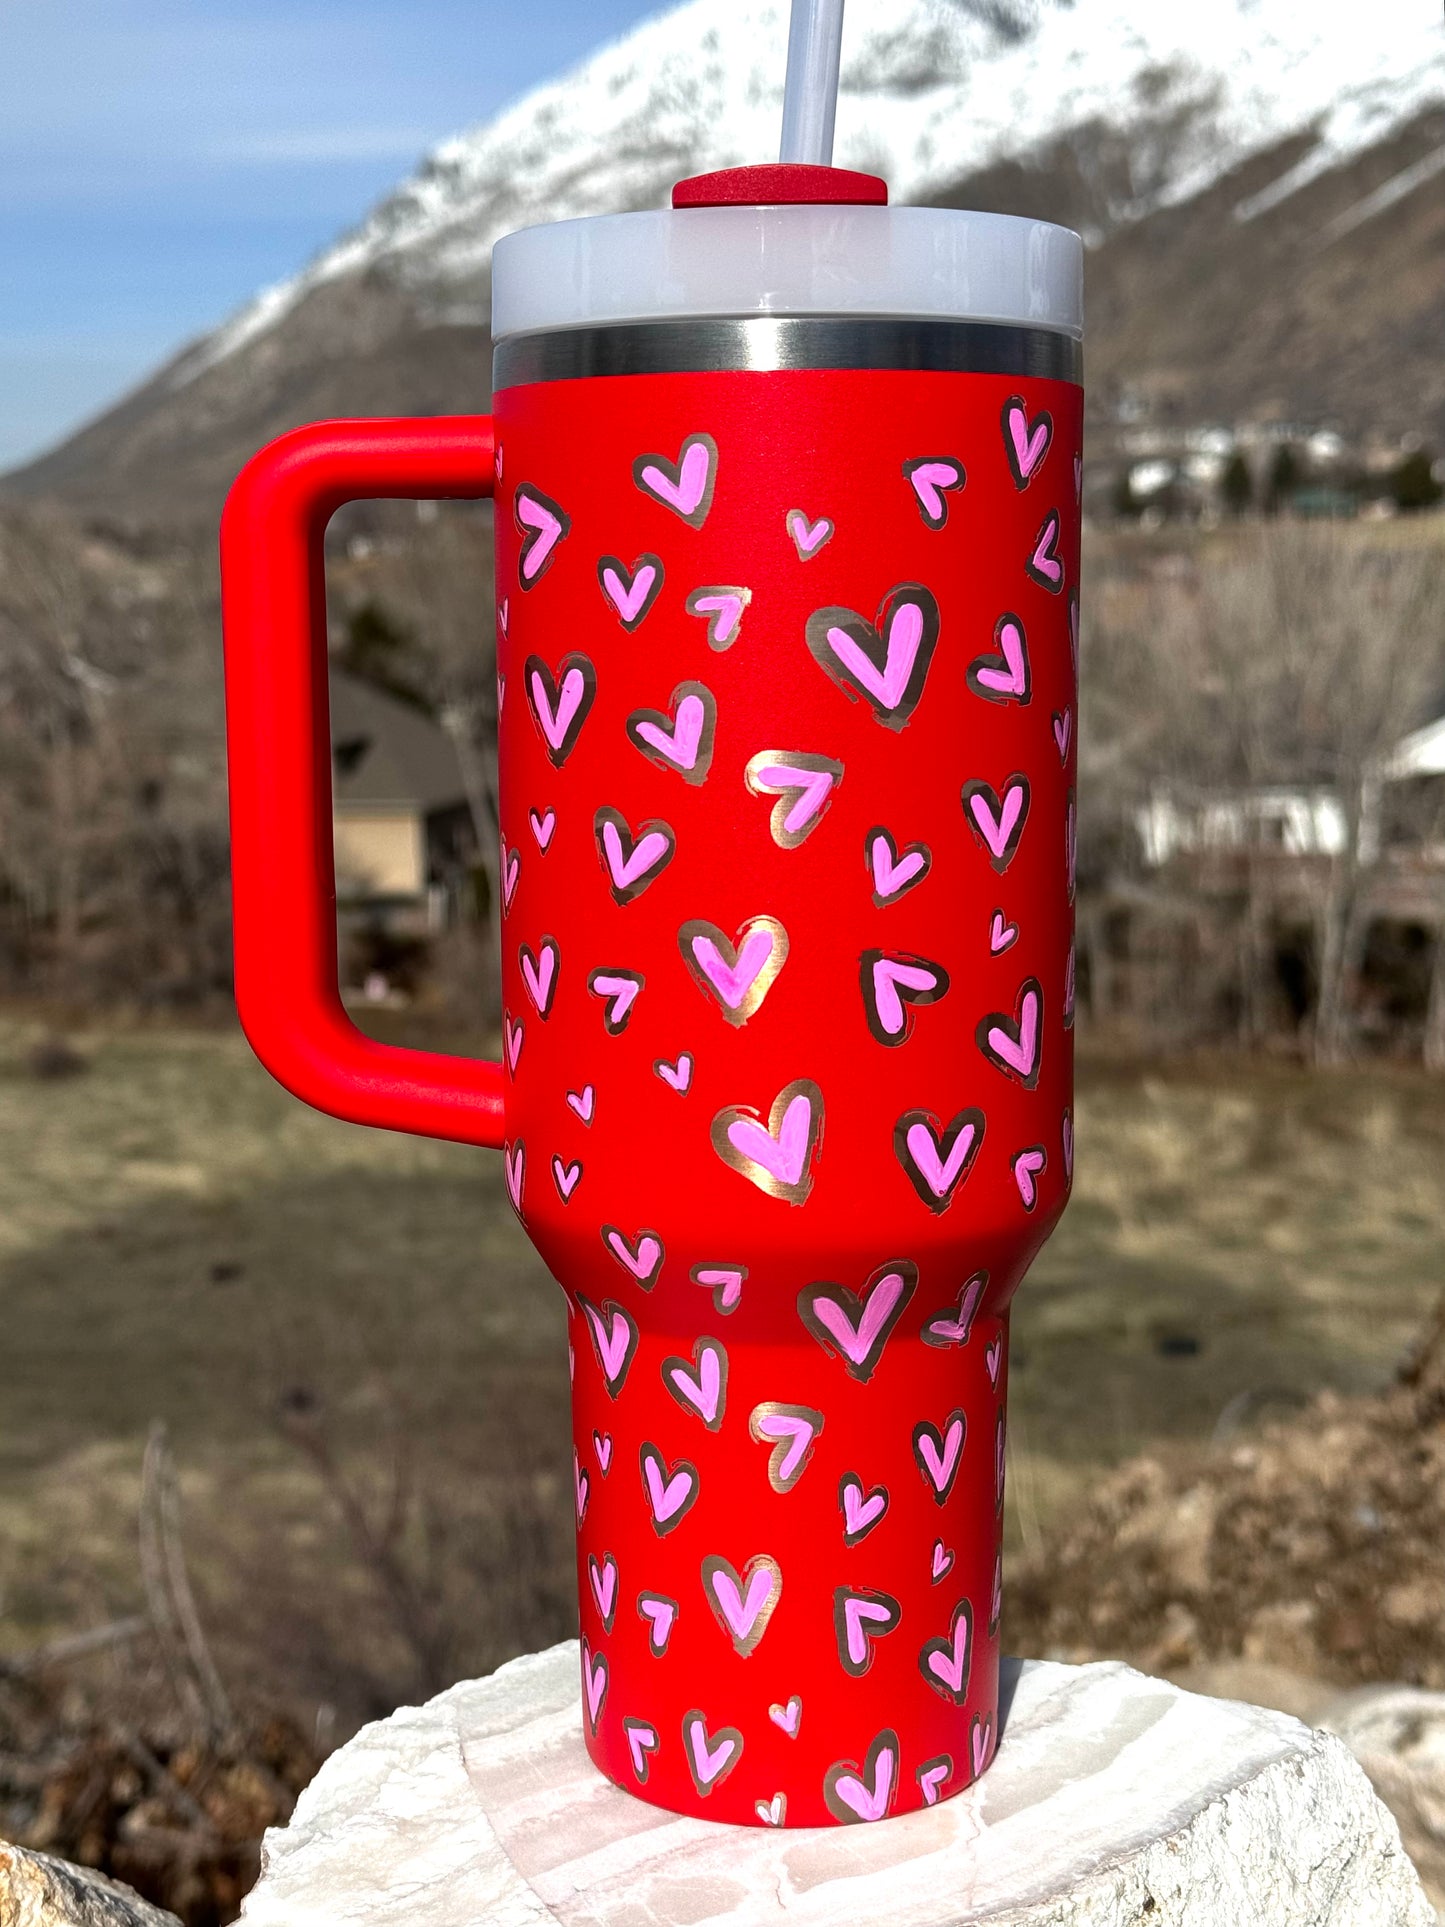 Stanley 40oz ‘Hearts’ Engraved and Painted Tumbler